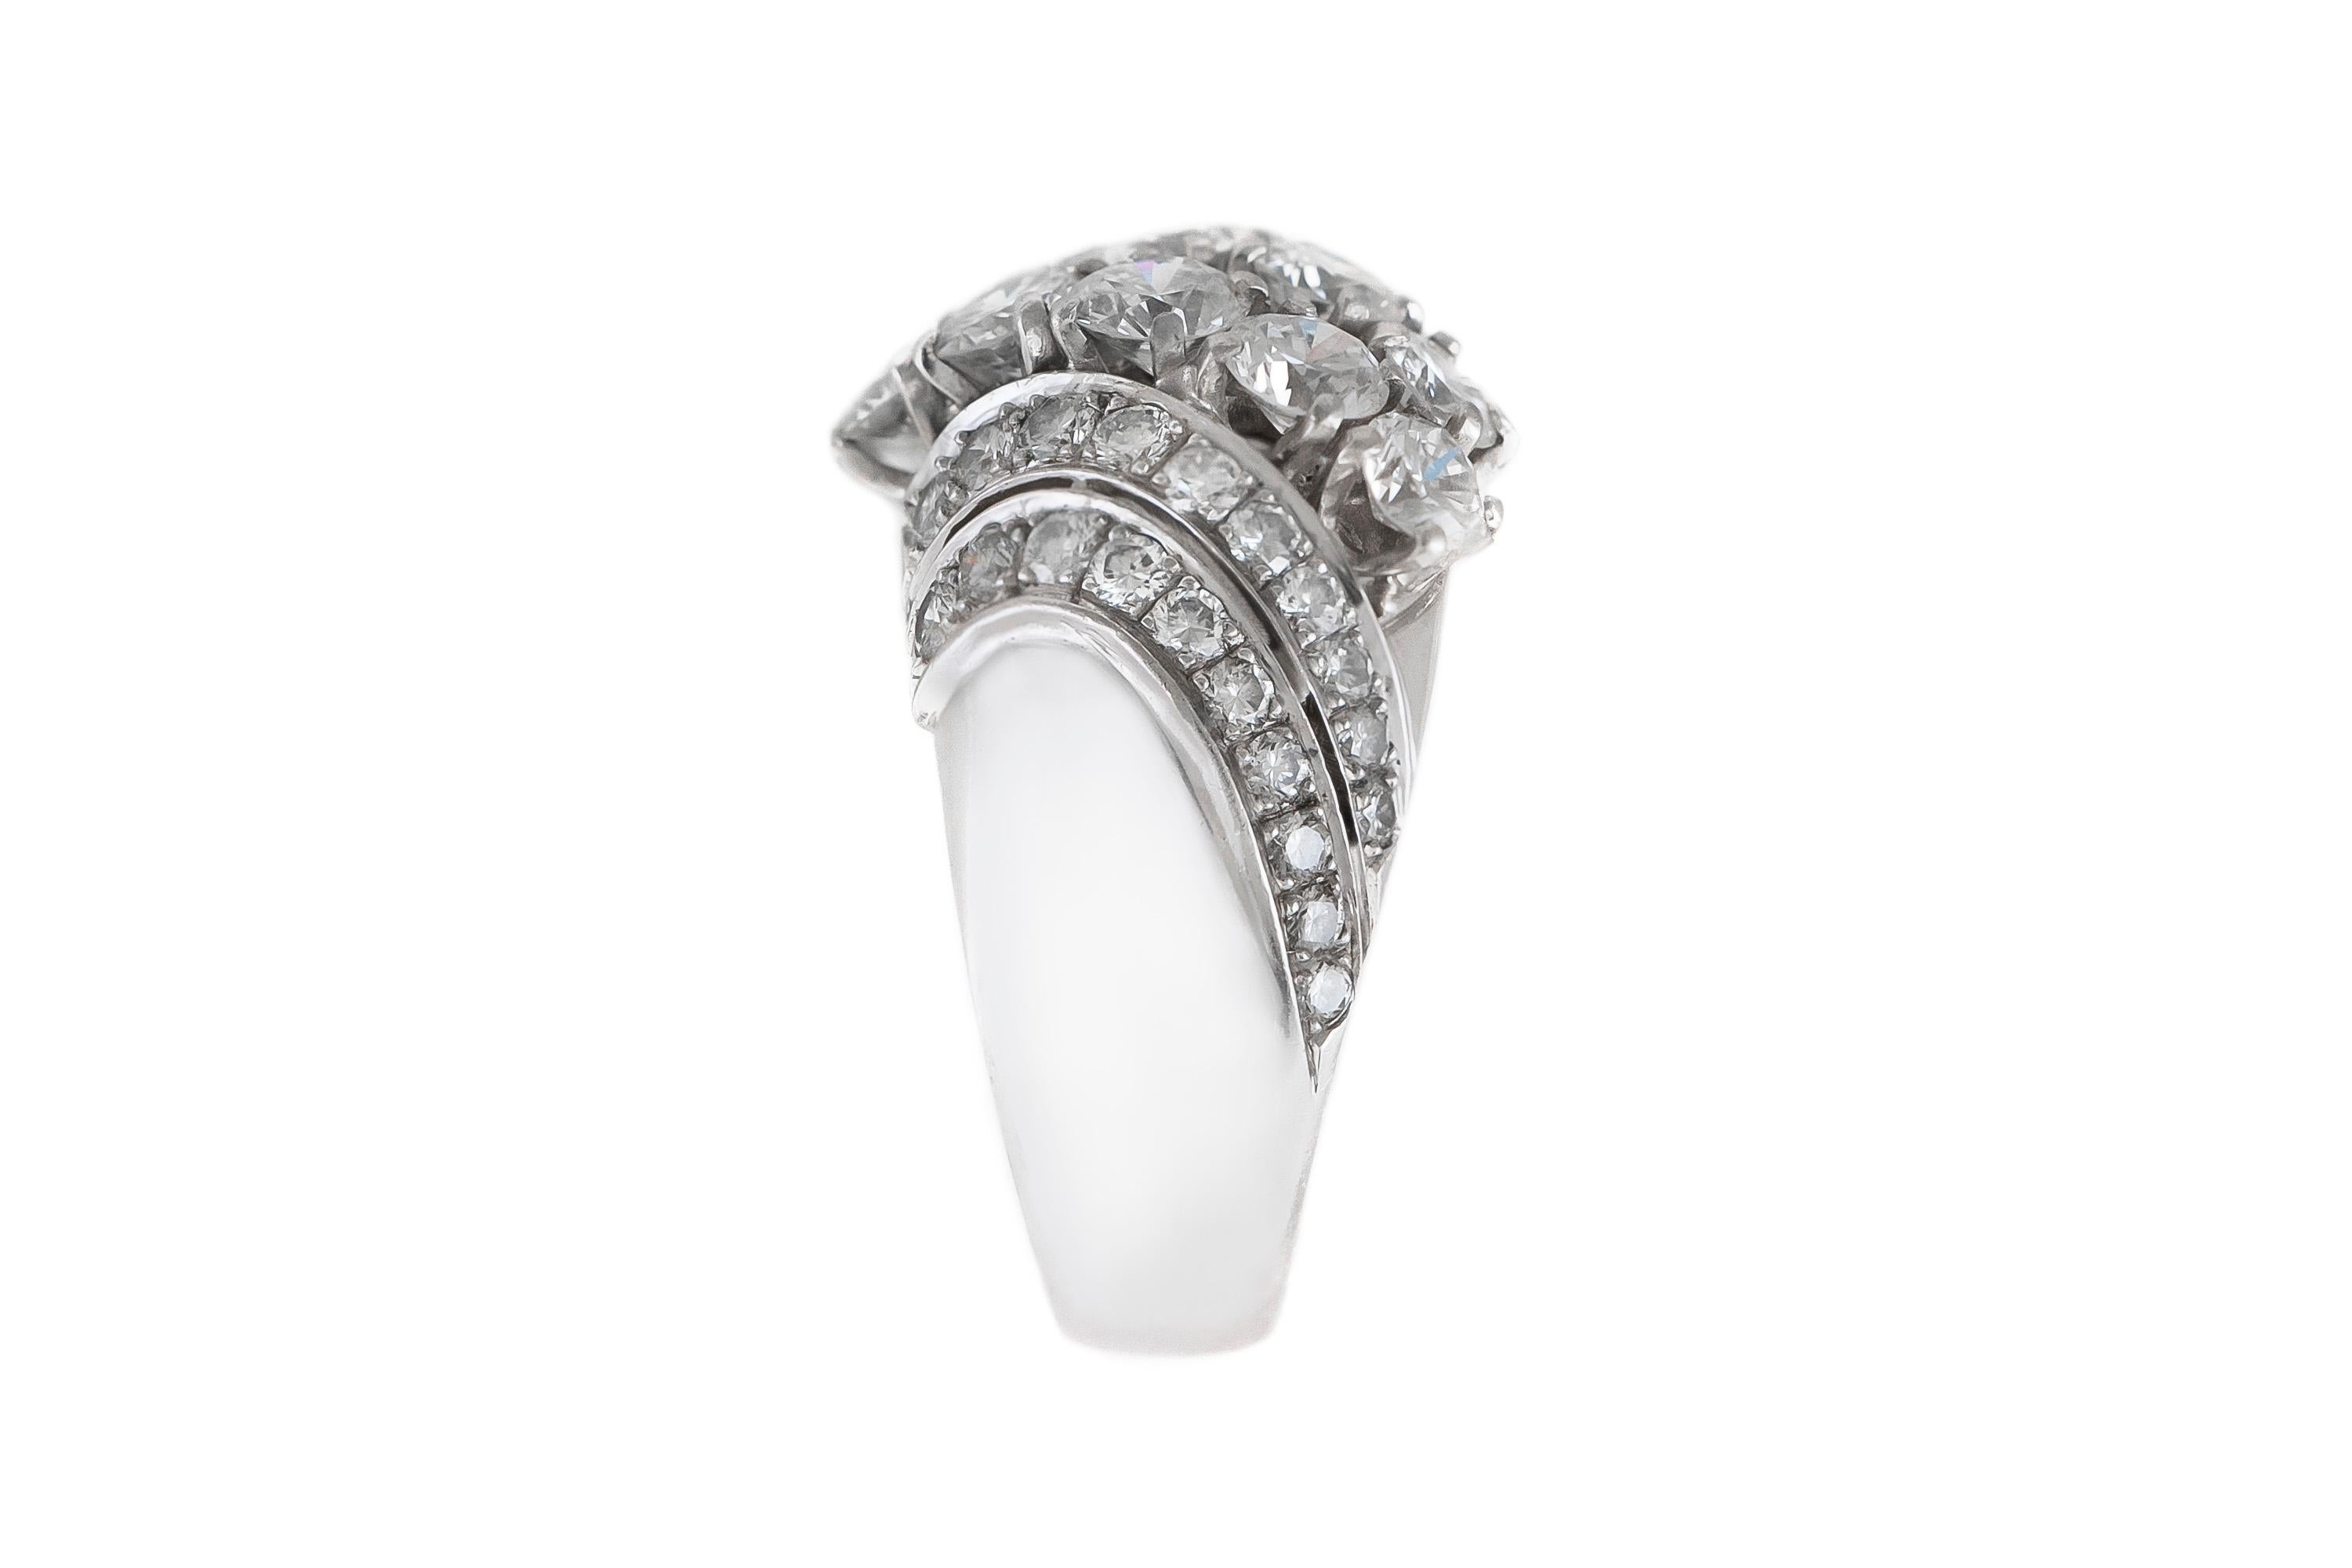 The ring is finely crafted in platinum with diamonds weighing approximately total of 3.00 carat.
Size 8.00 ( easy to resize )
Circa 1940.